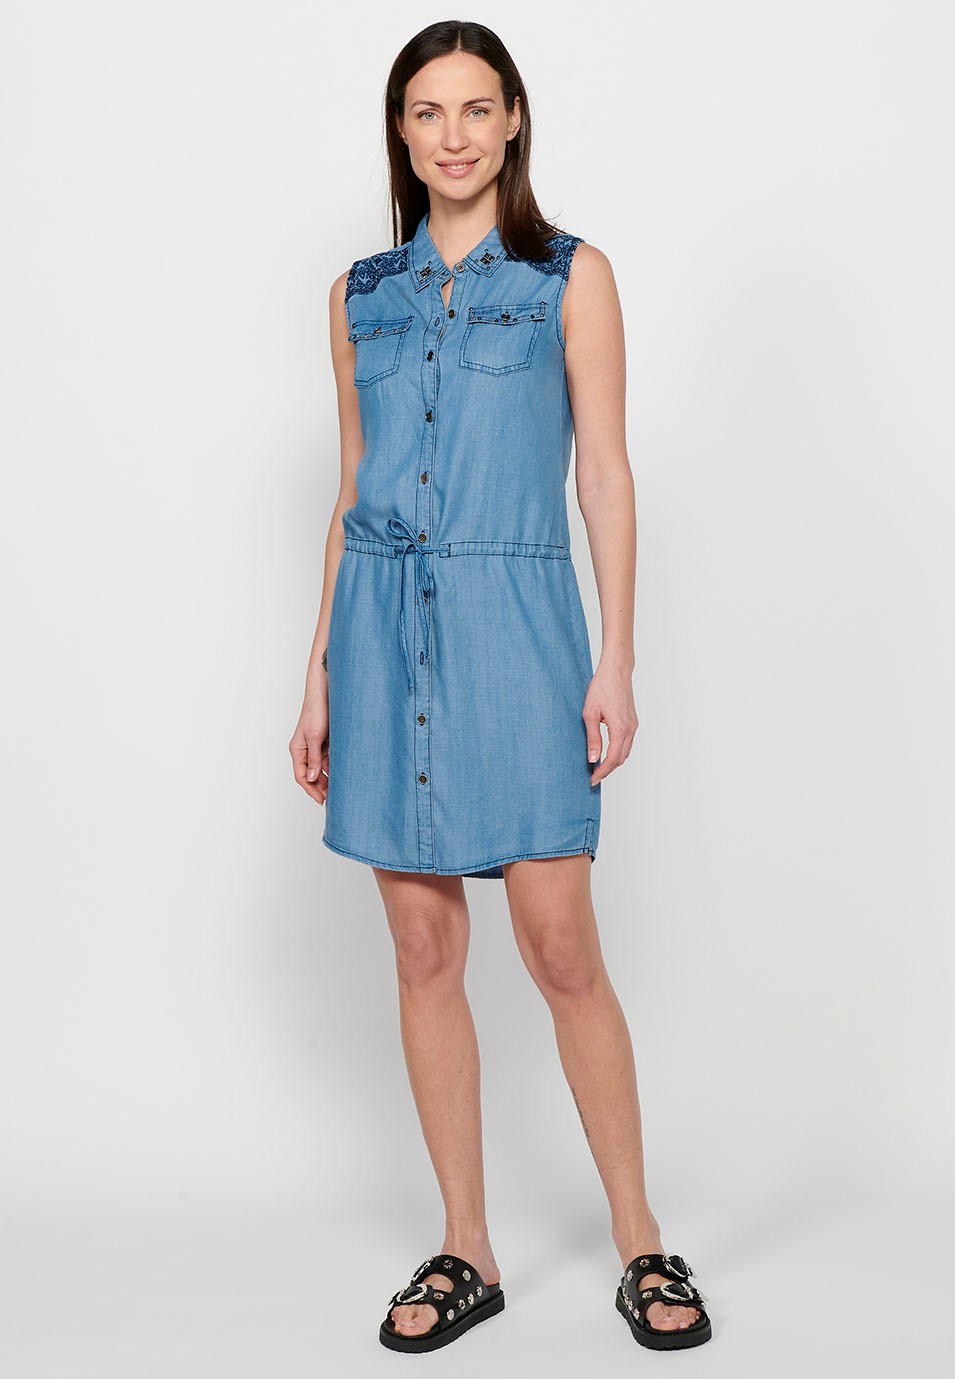 Sleeveless midi dress with front closure with buttons and embroidered details, tight at the waist in Blue for Women